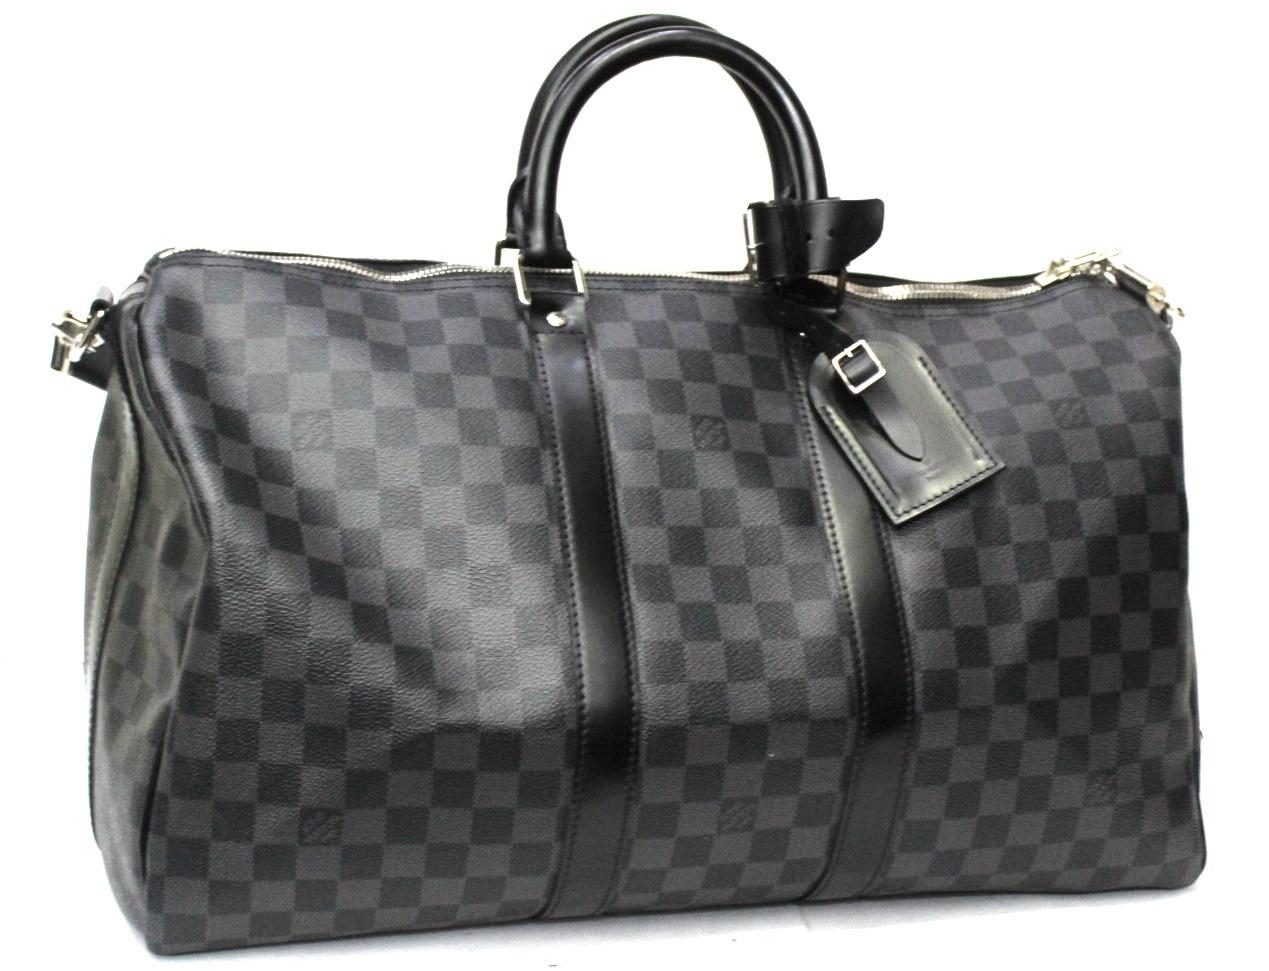 Keepall bandouliere 45 cm signed Louis Vuitton in damier graphite canvas. Cowhide details. Silver hardware. Possibility to carry it by hand and over the shoulder. Adjustable shoulder strap. Equipped with a padlock and removable leather doors.